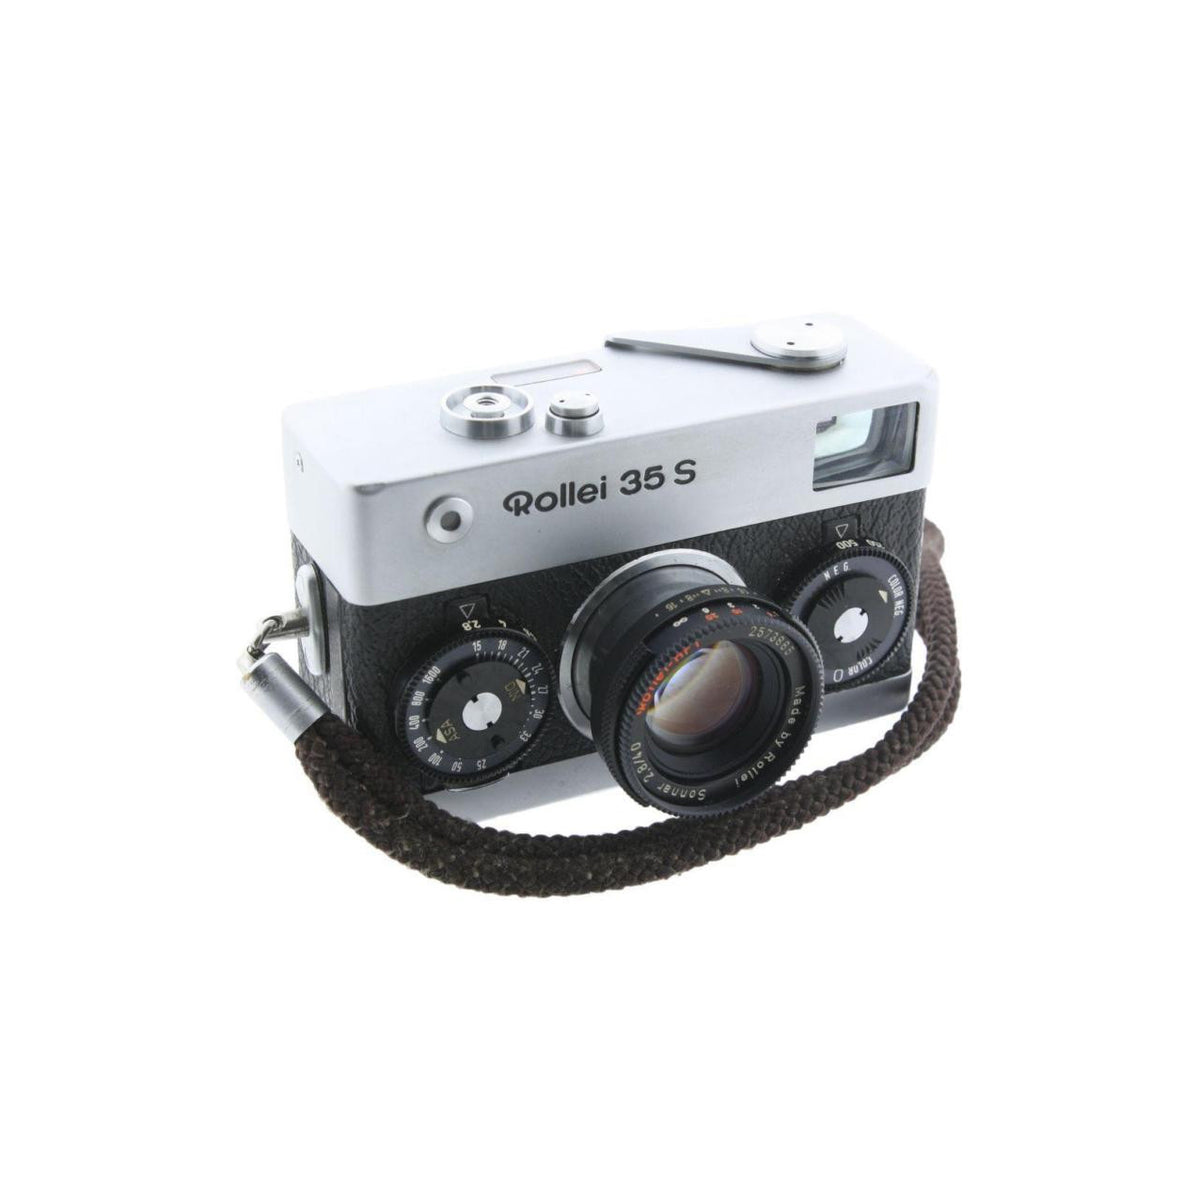 Rollei 35 S Vintage Camera | The Society Of The Crossed Keys